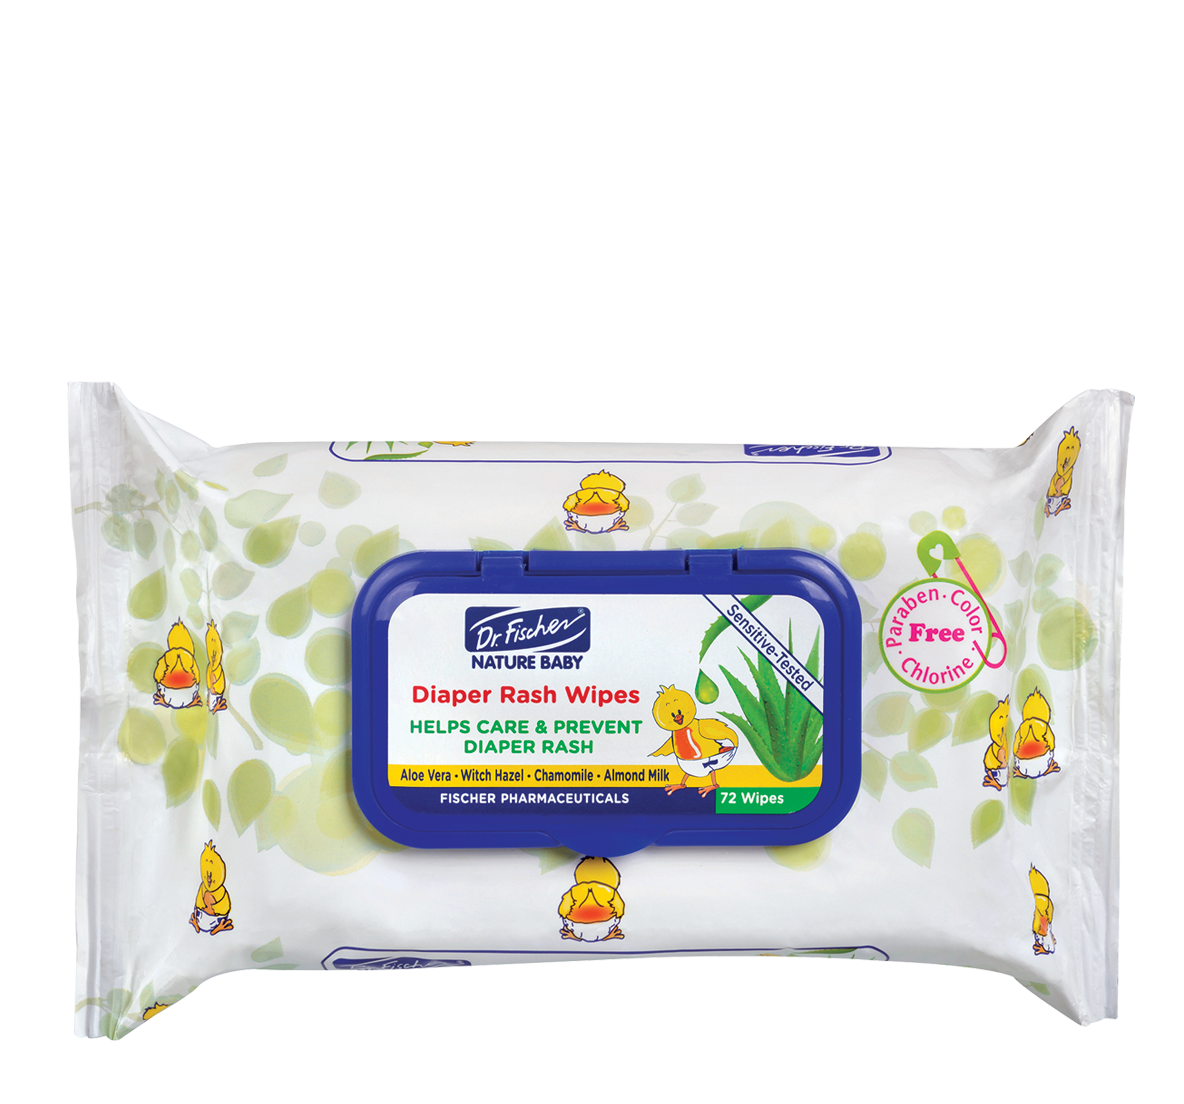 E_nature-baby_wipes_1184x1104